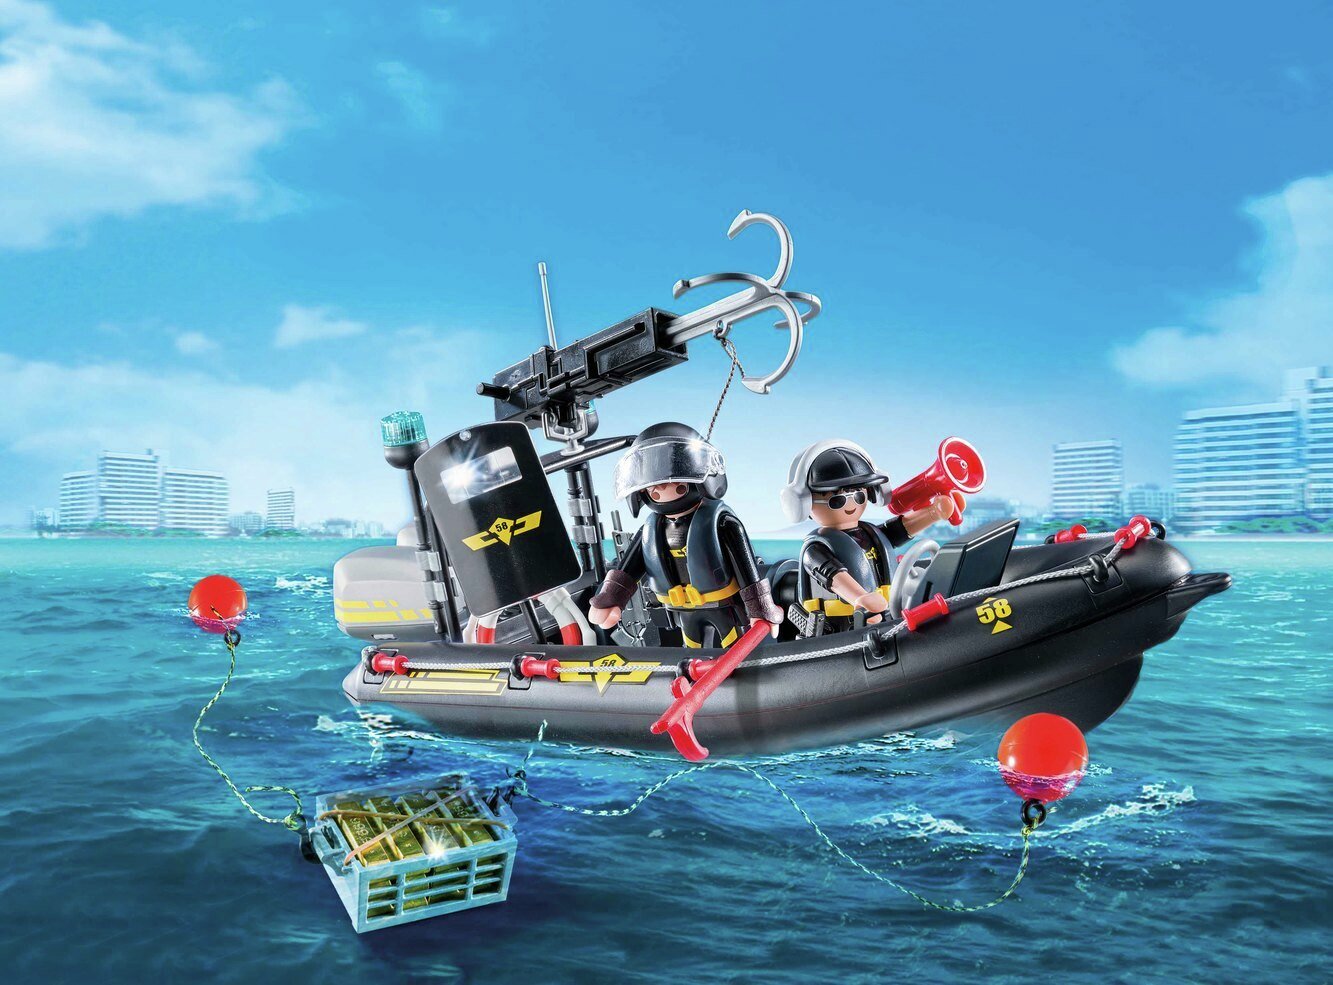 Playmobil 9362 City Action SWAT Boat Review